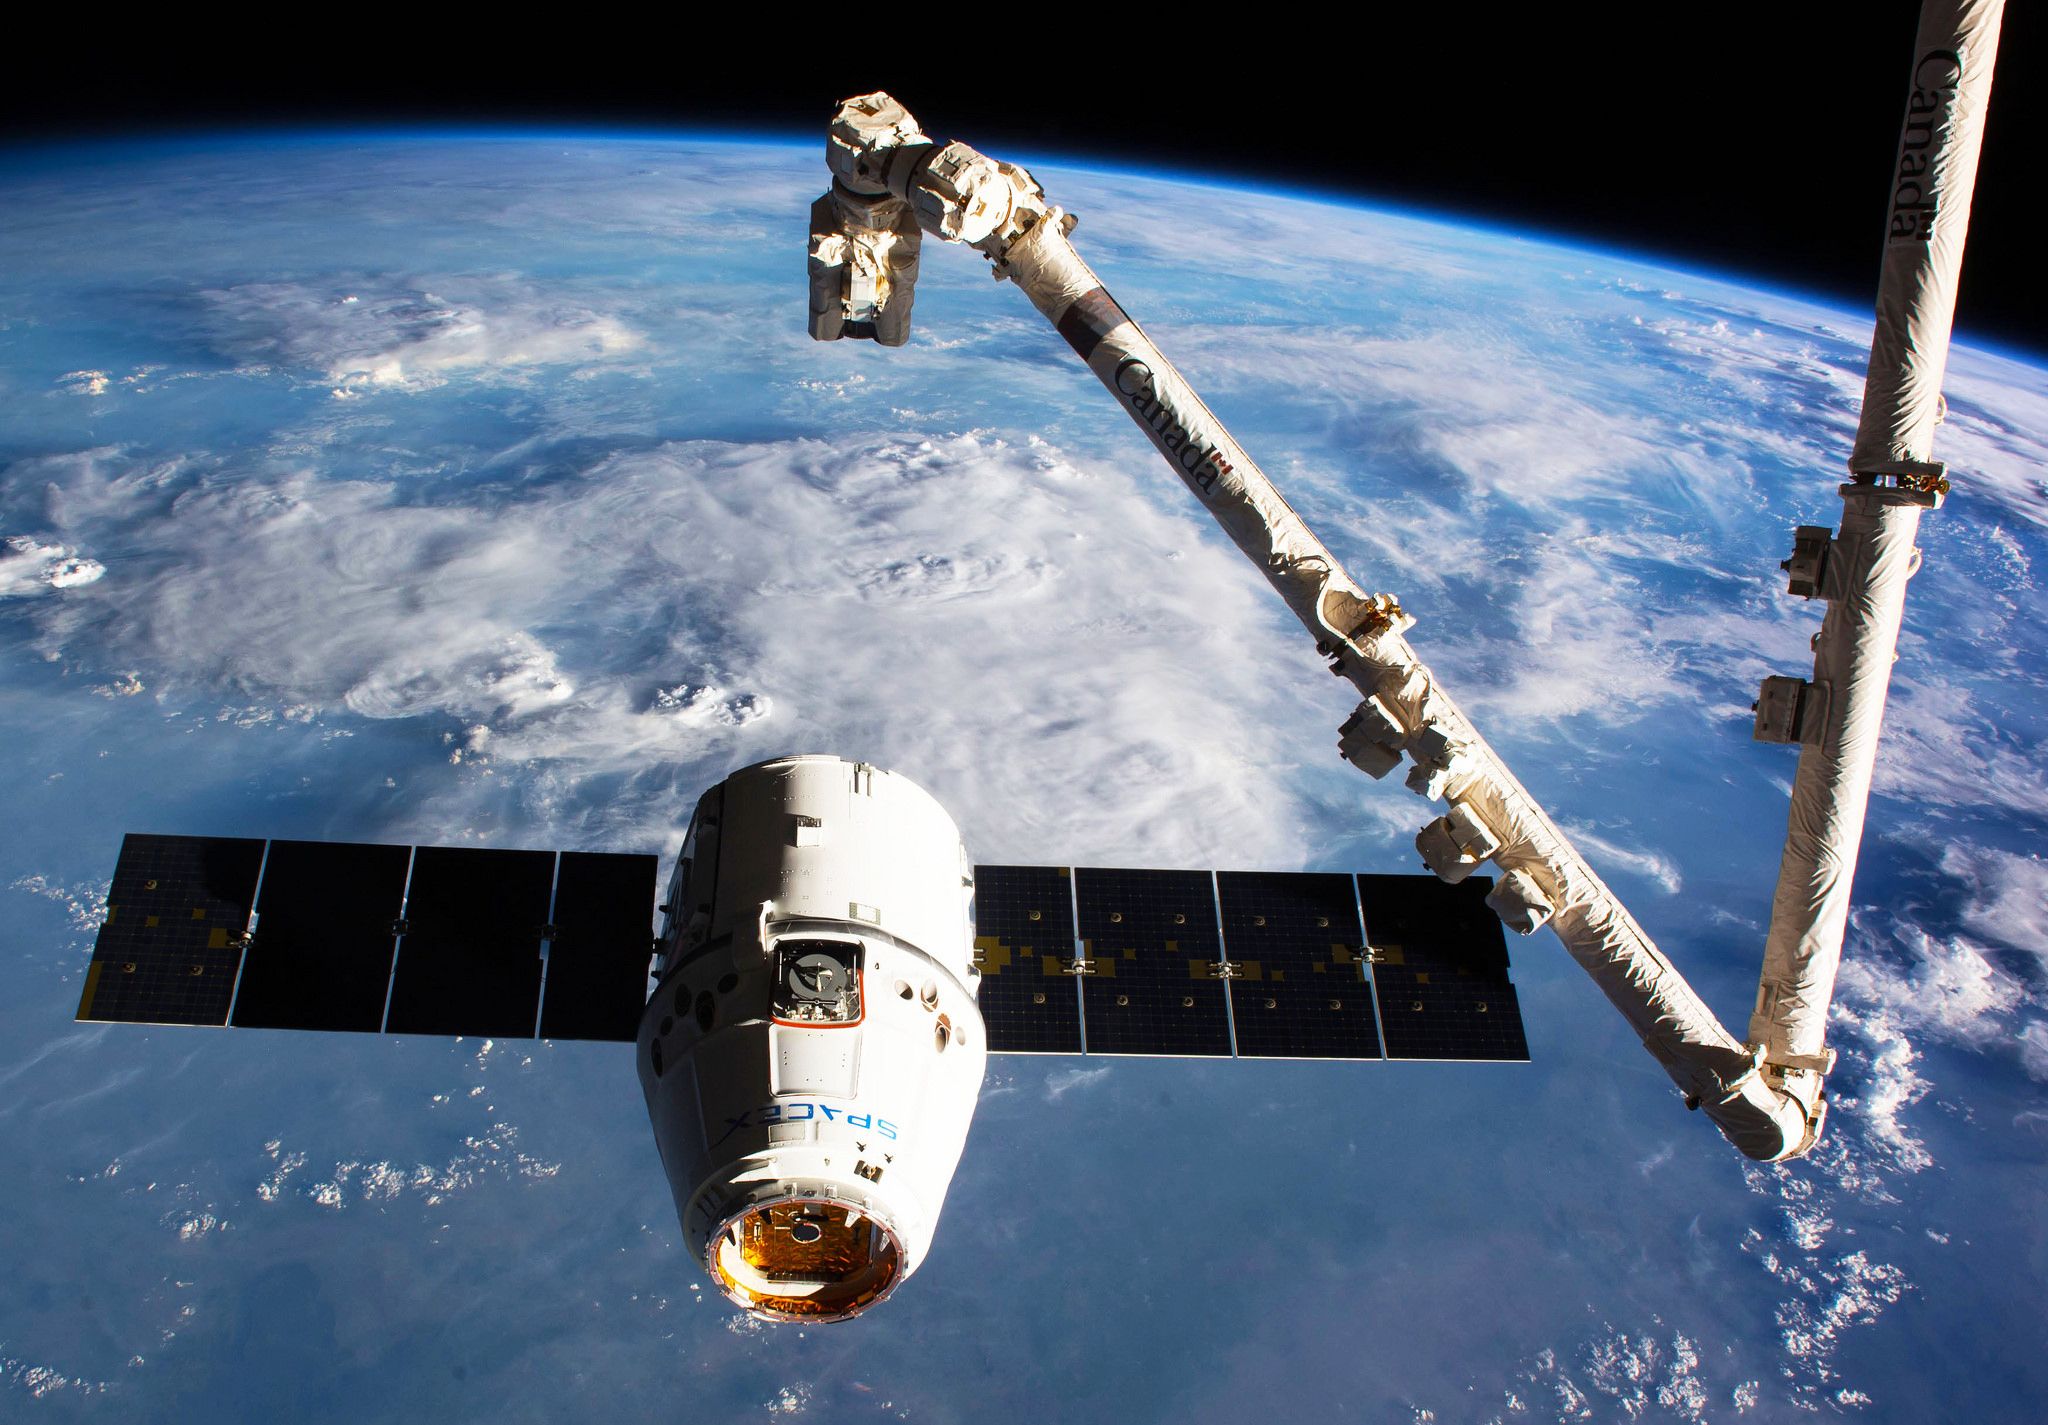 SpaceX Dragon capsule at the International Space Station